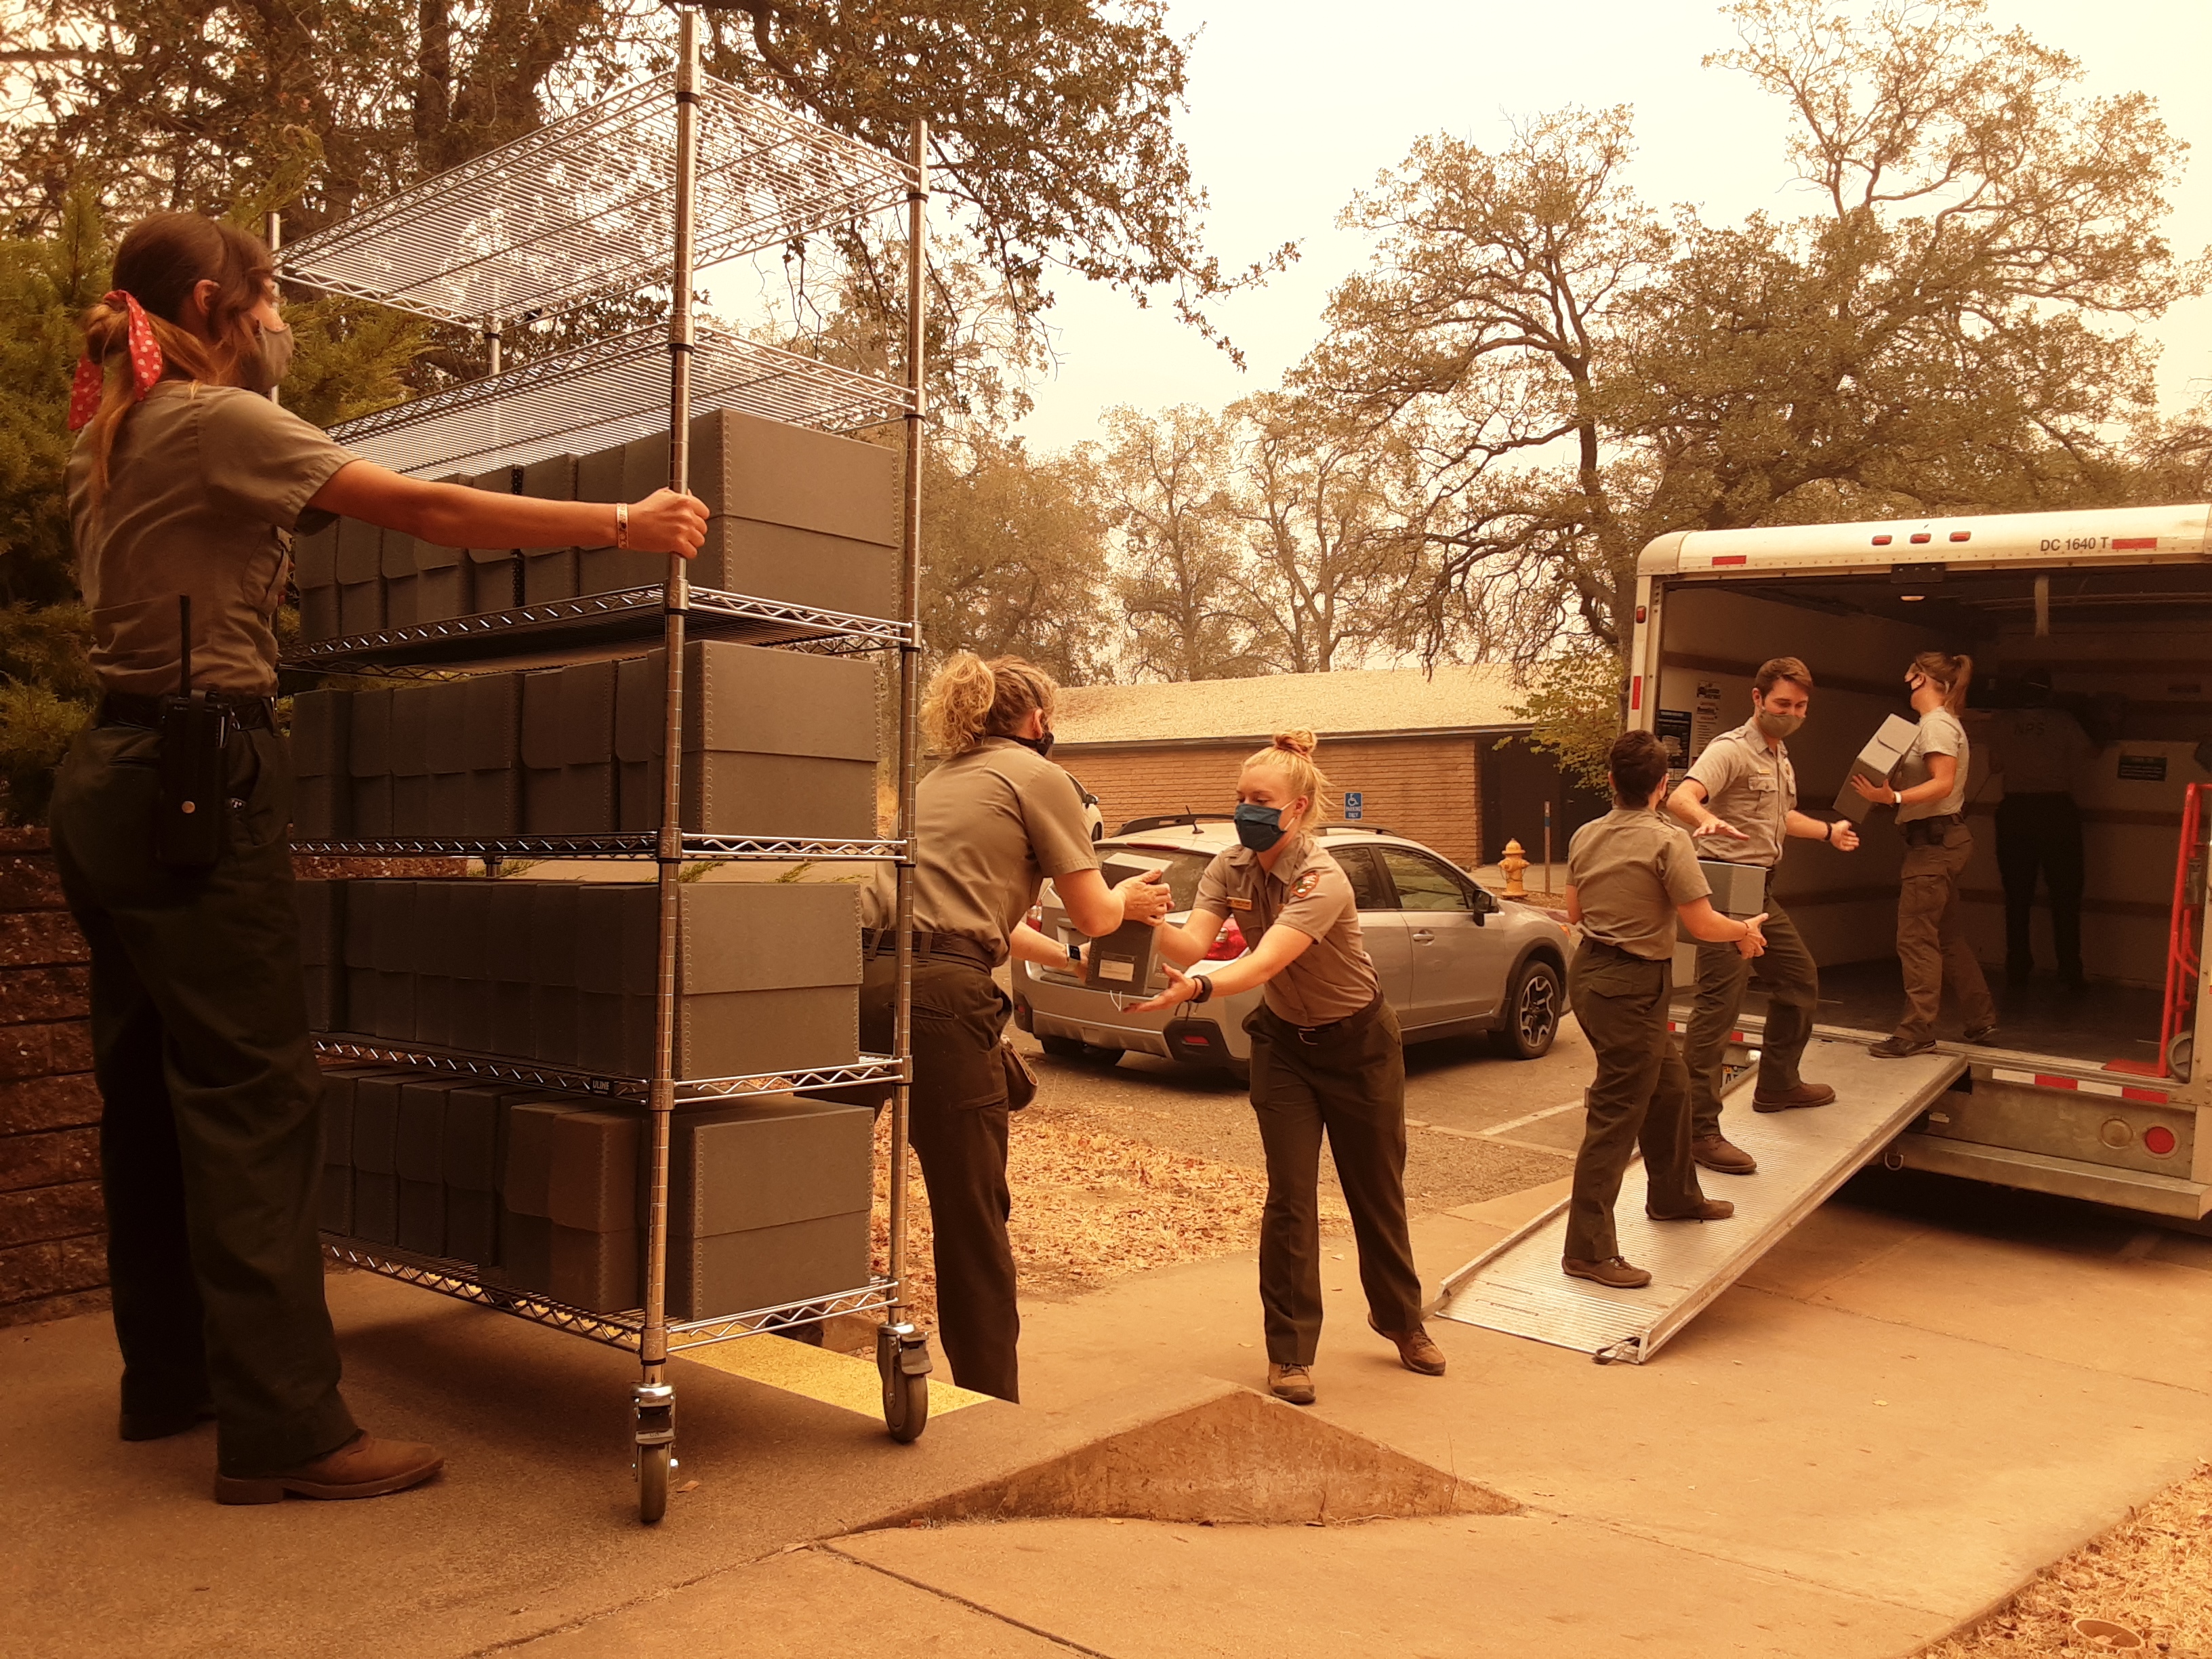 Fire-Threatened National Parks Archives Find Safe Home at University of California–Merced